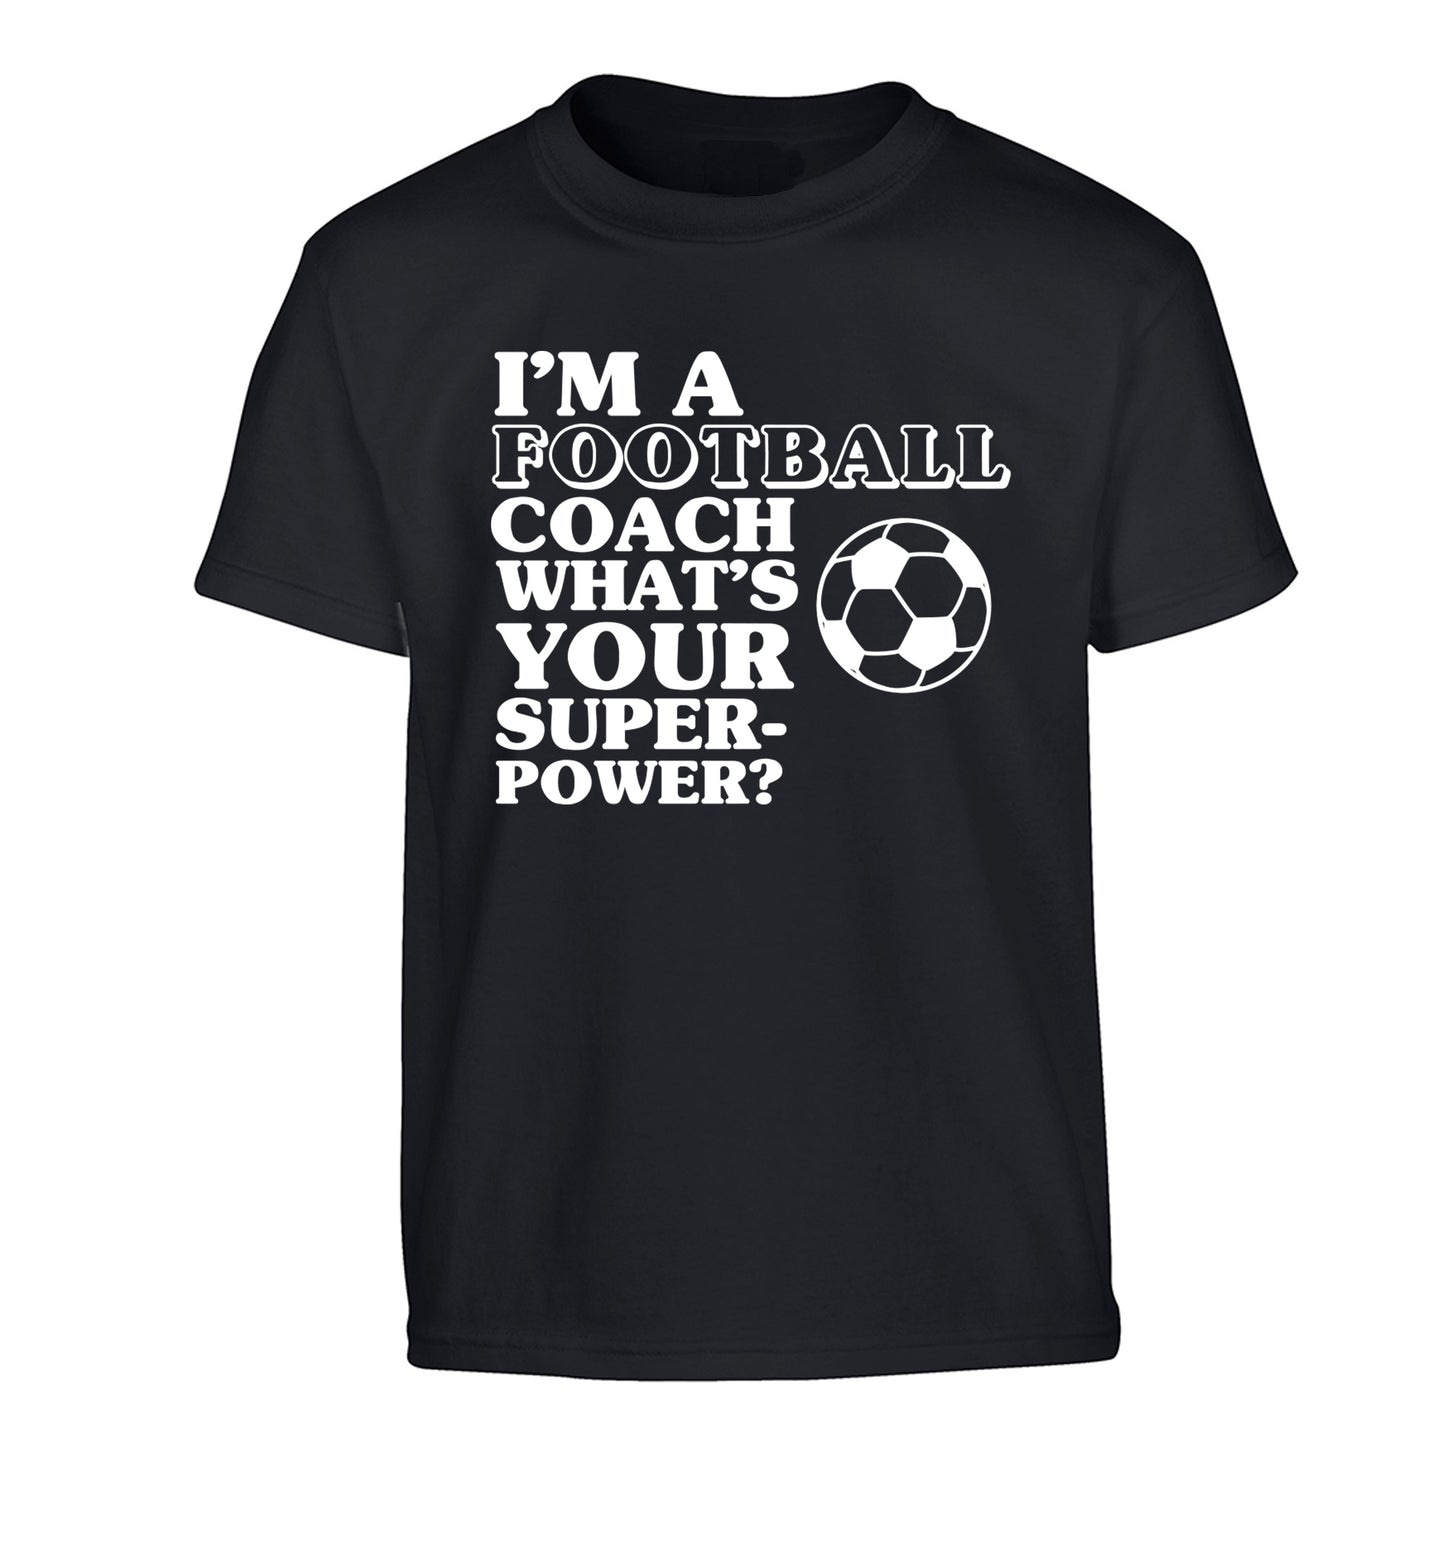 I'm a football coach what's your superpower? Children's black Tshirt 12-14 Years